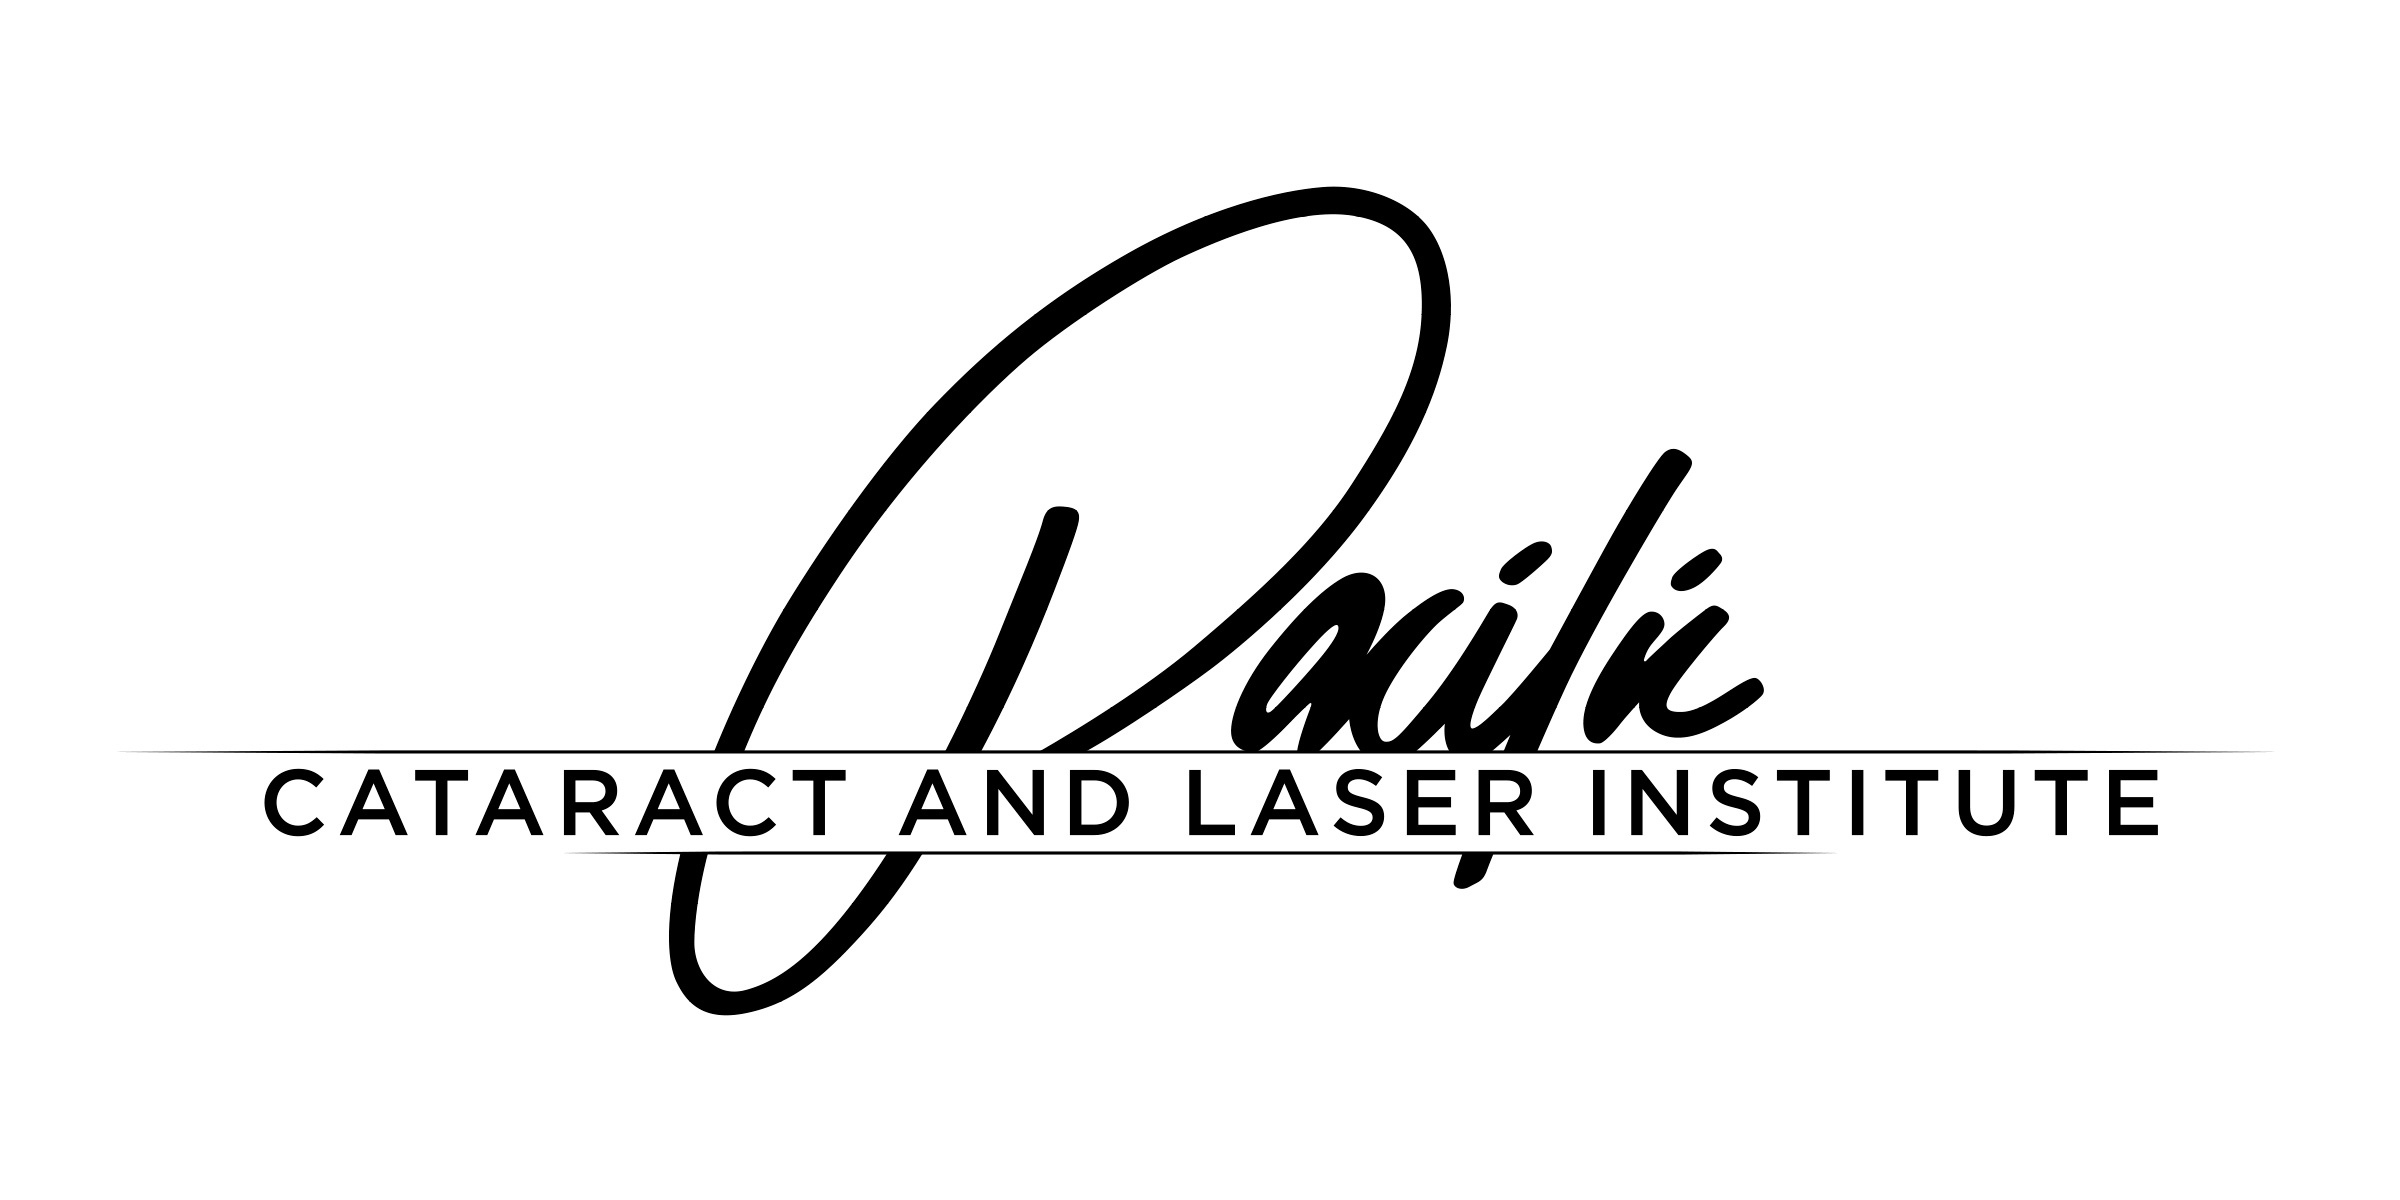 Pacific Cataract and laser Institute Logo, Gold Sponsor